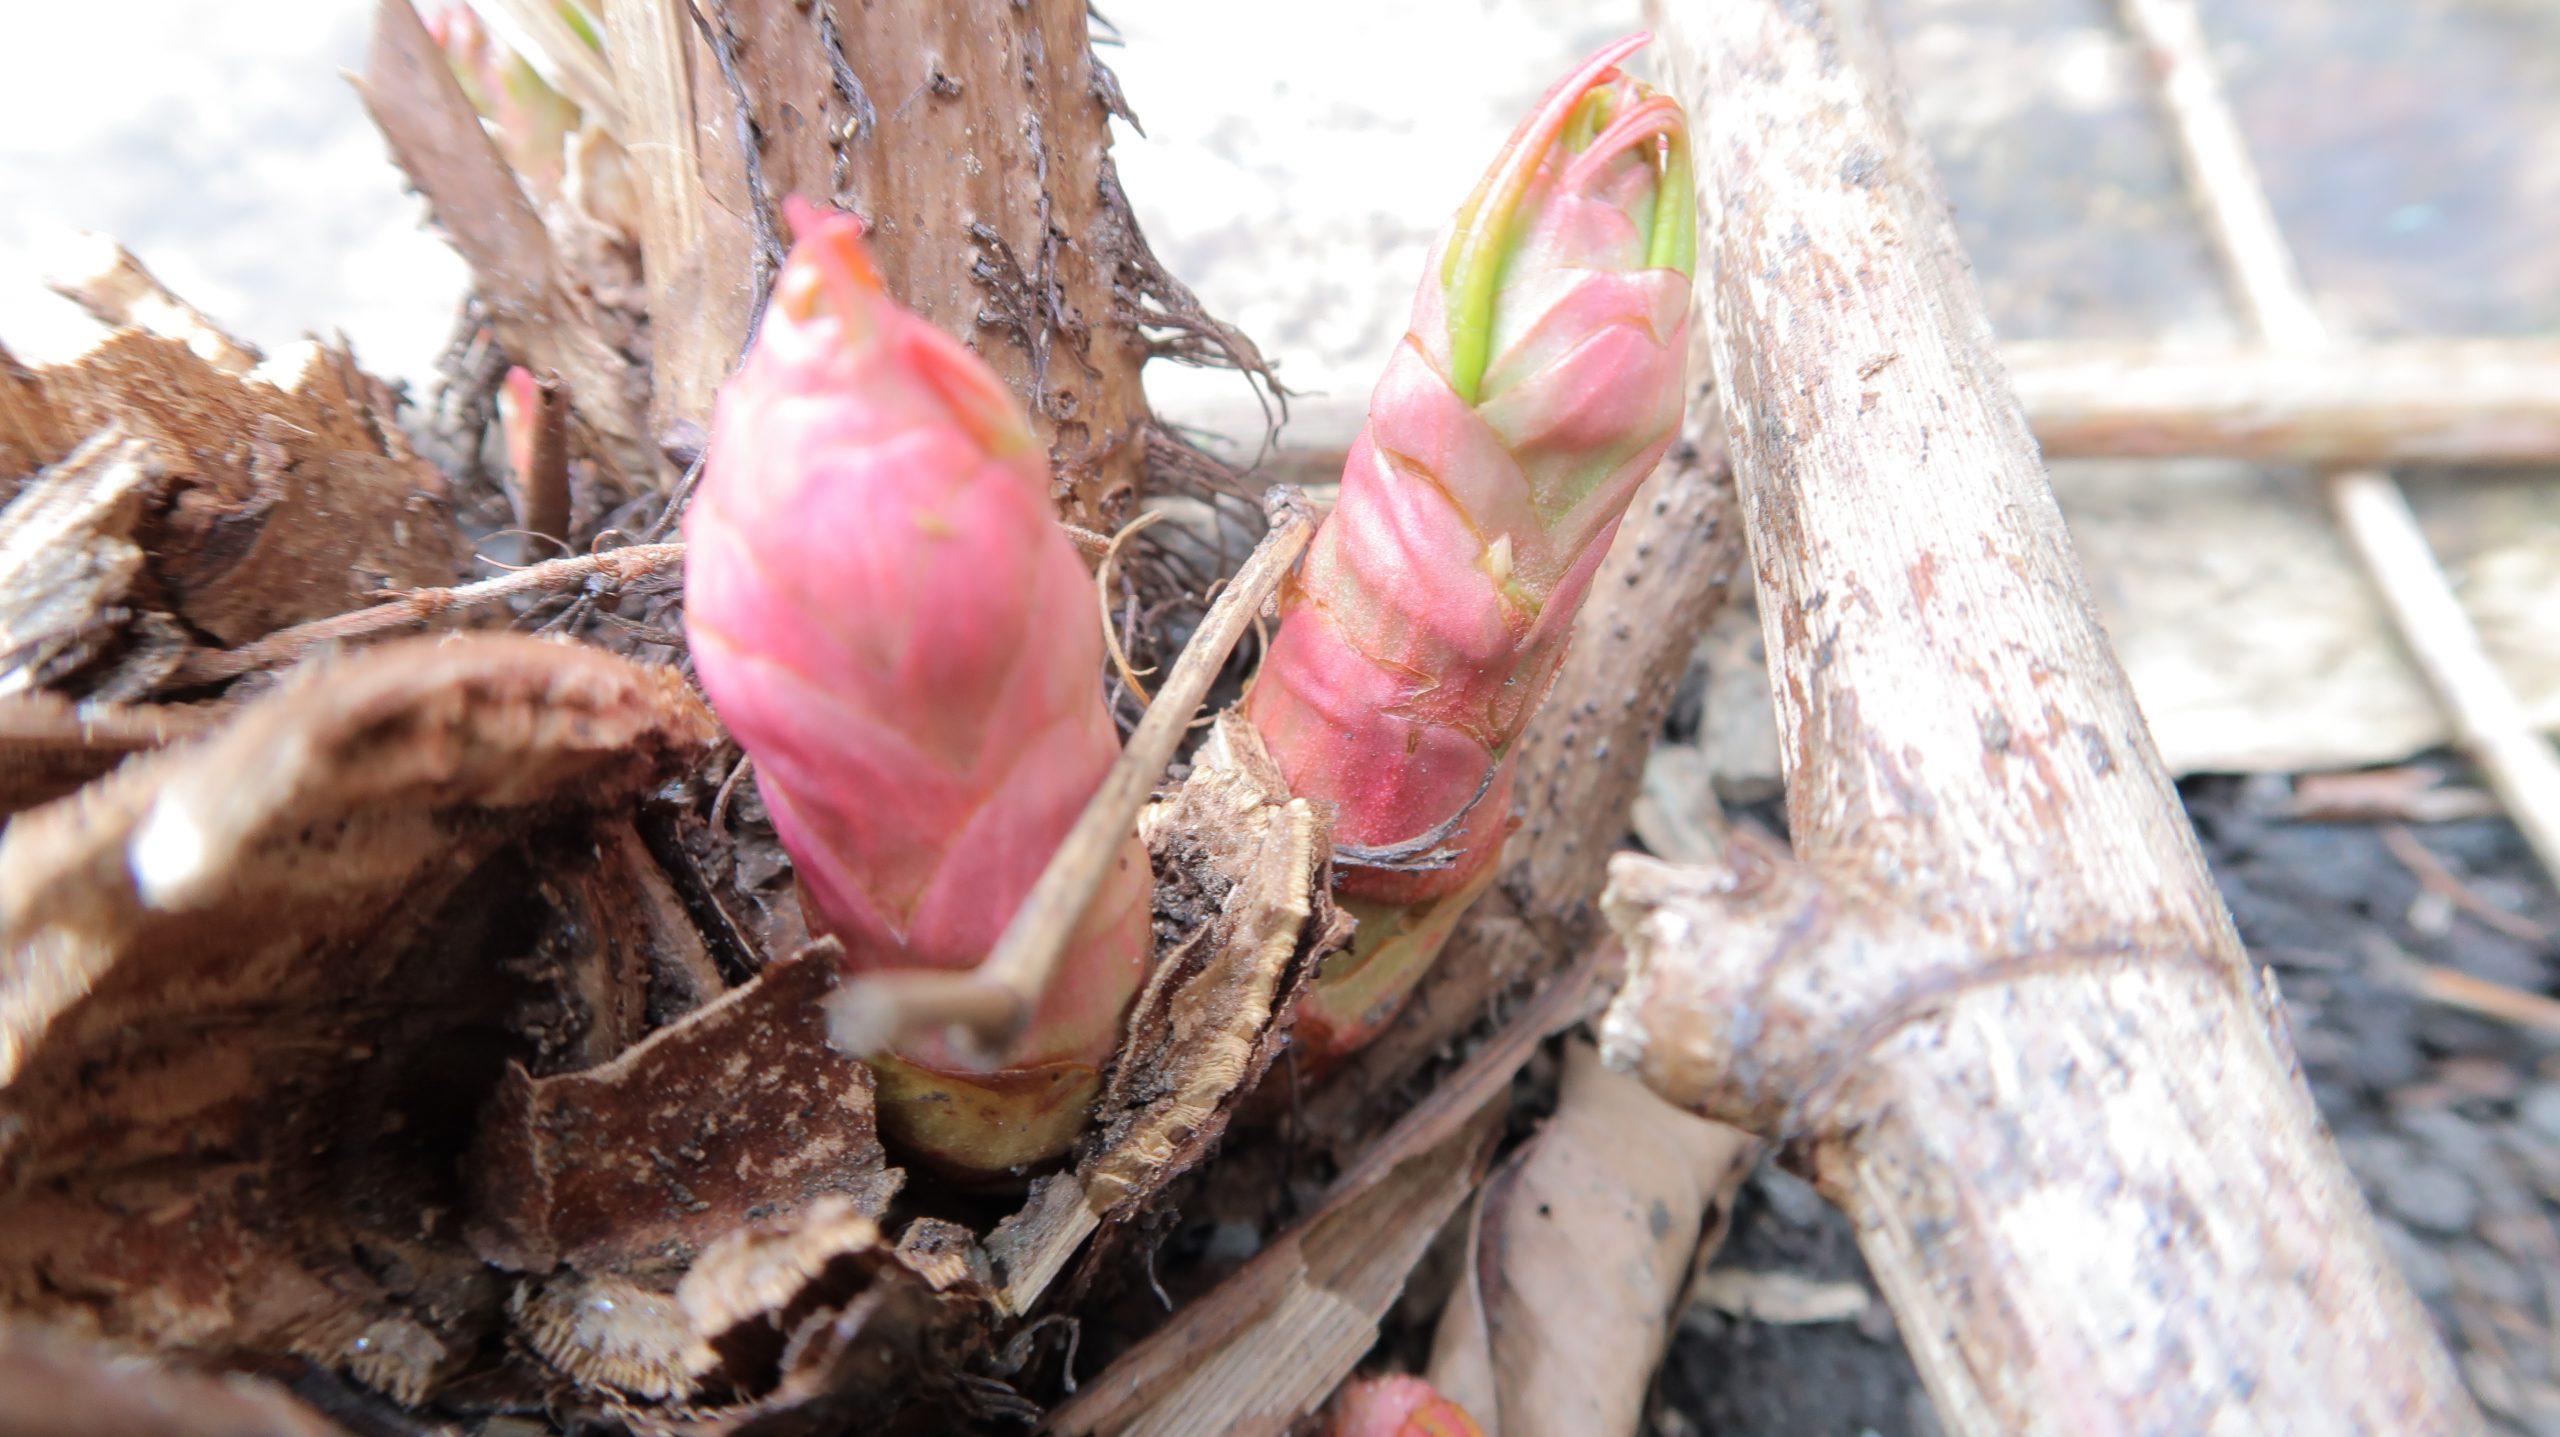 The early signs of Japanese knotweed buds poking out of the ground in early Spring - commercial knotweed removal